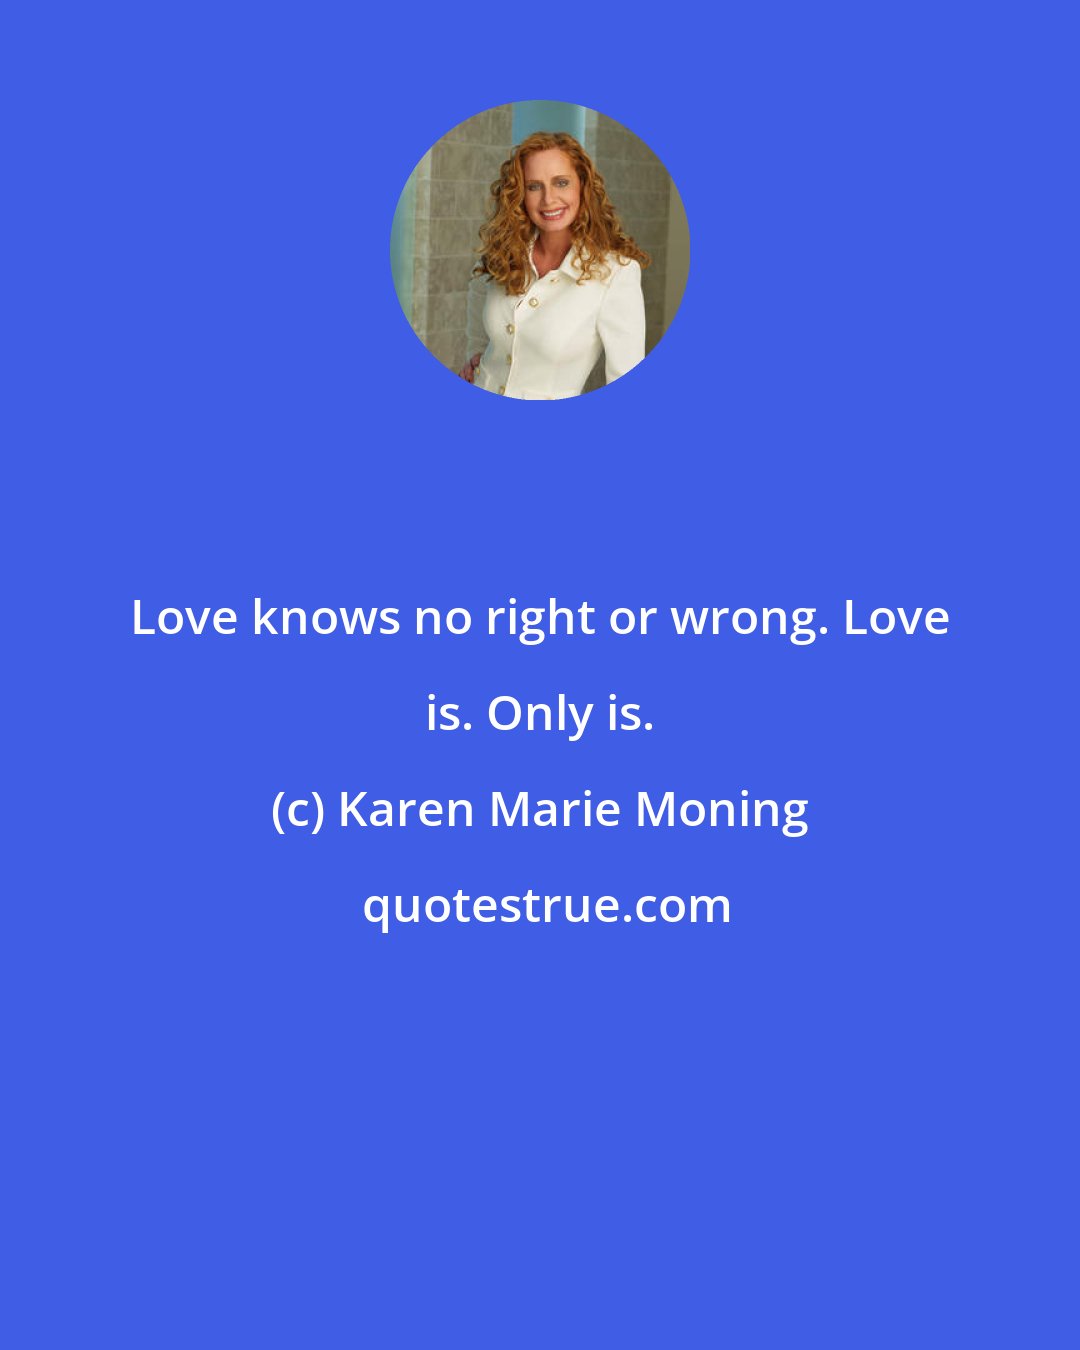 Karen Marie Moning: Love knows no right or wrong. Love is. Only is.